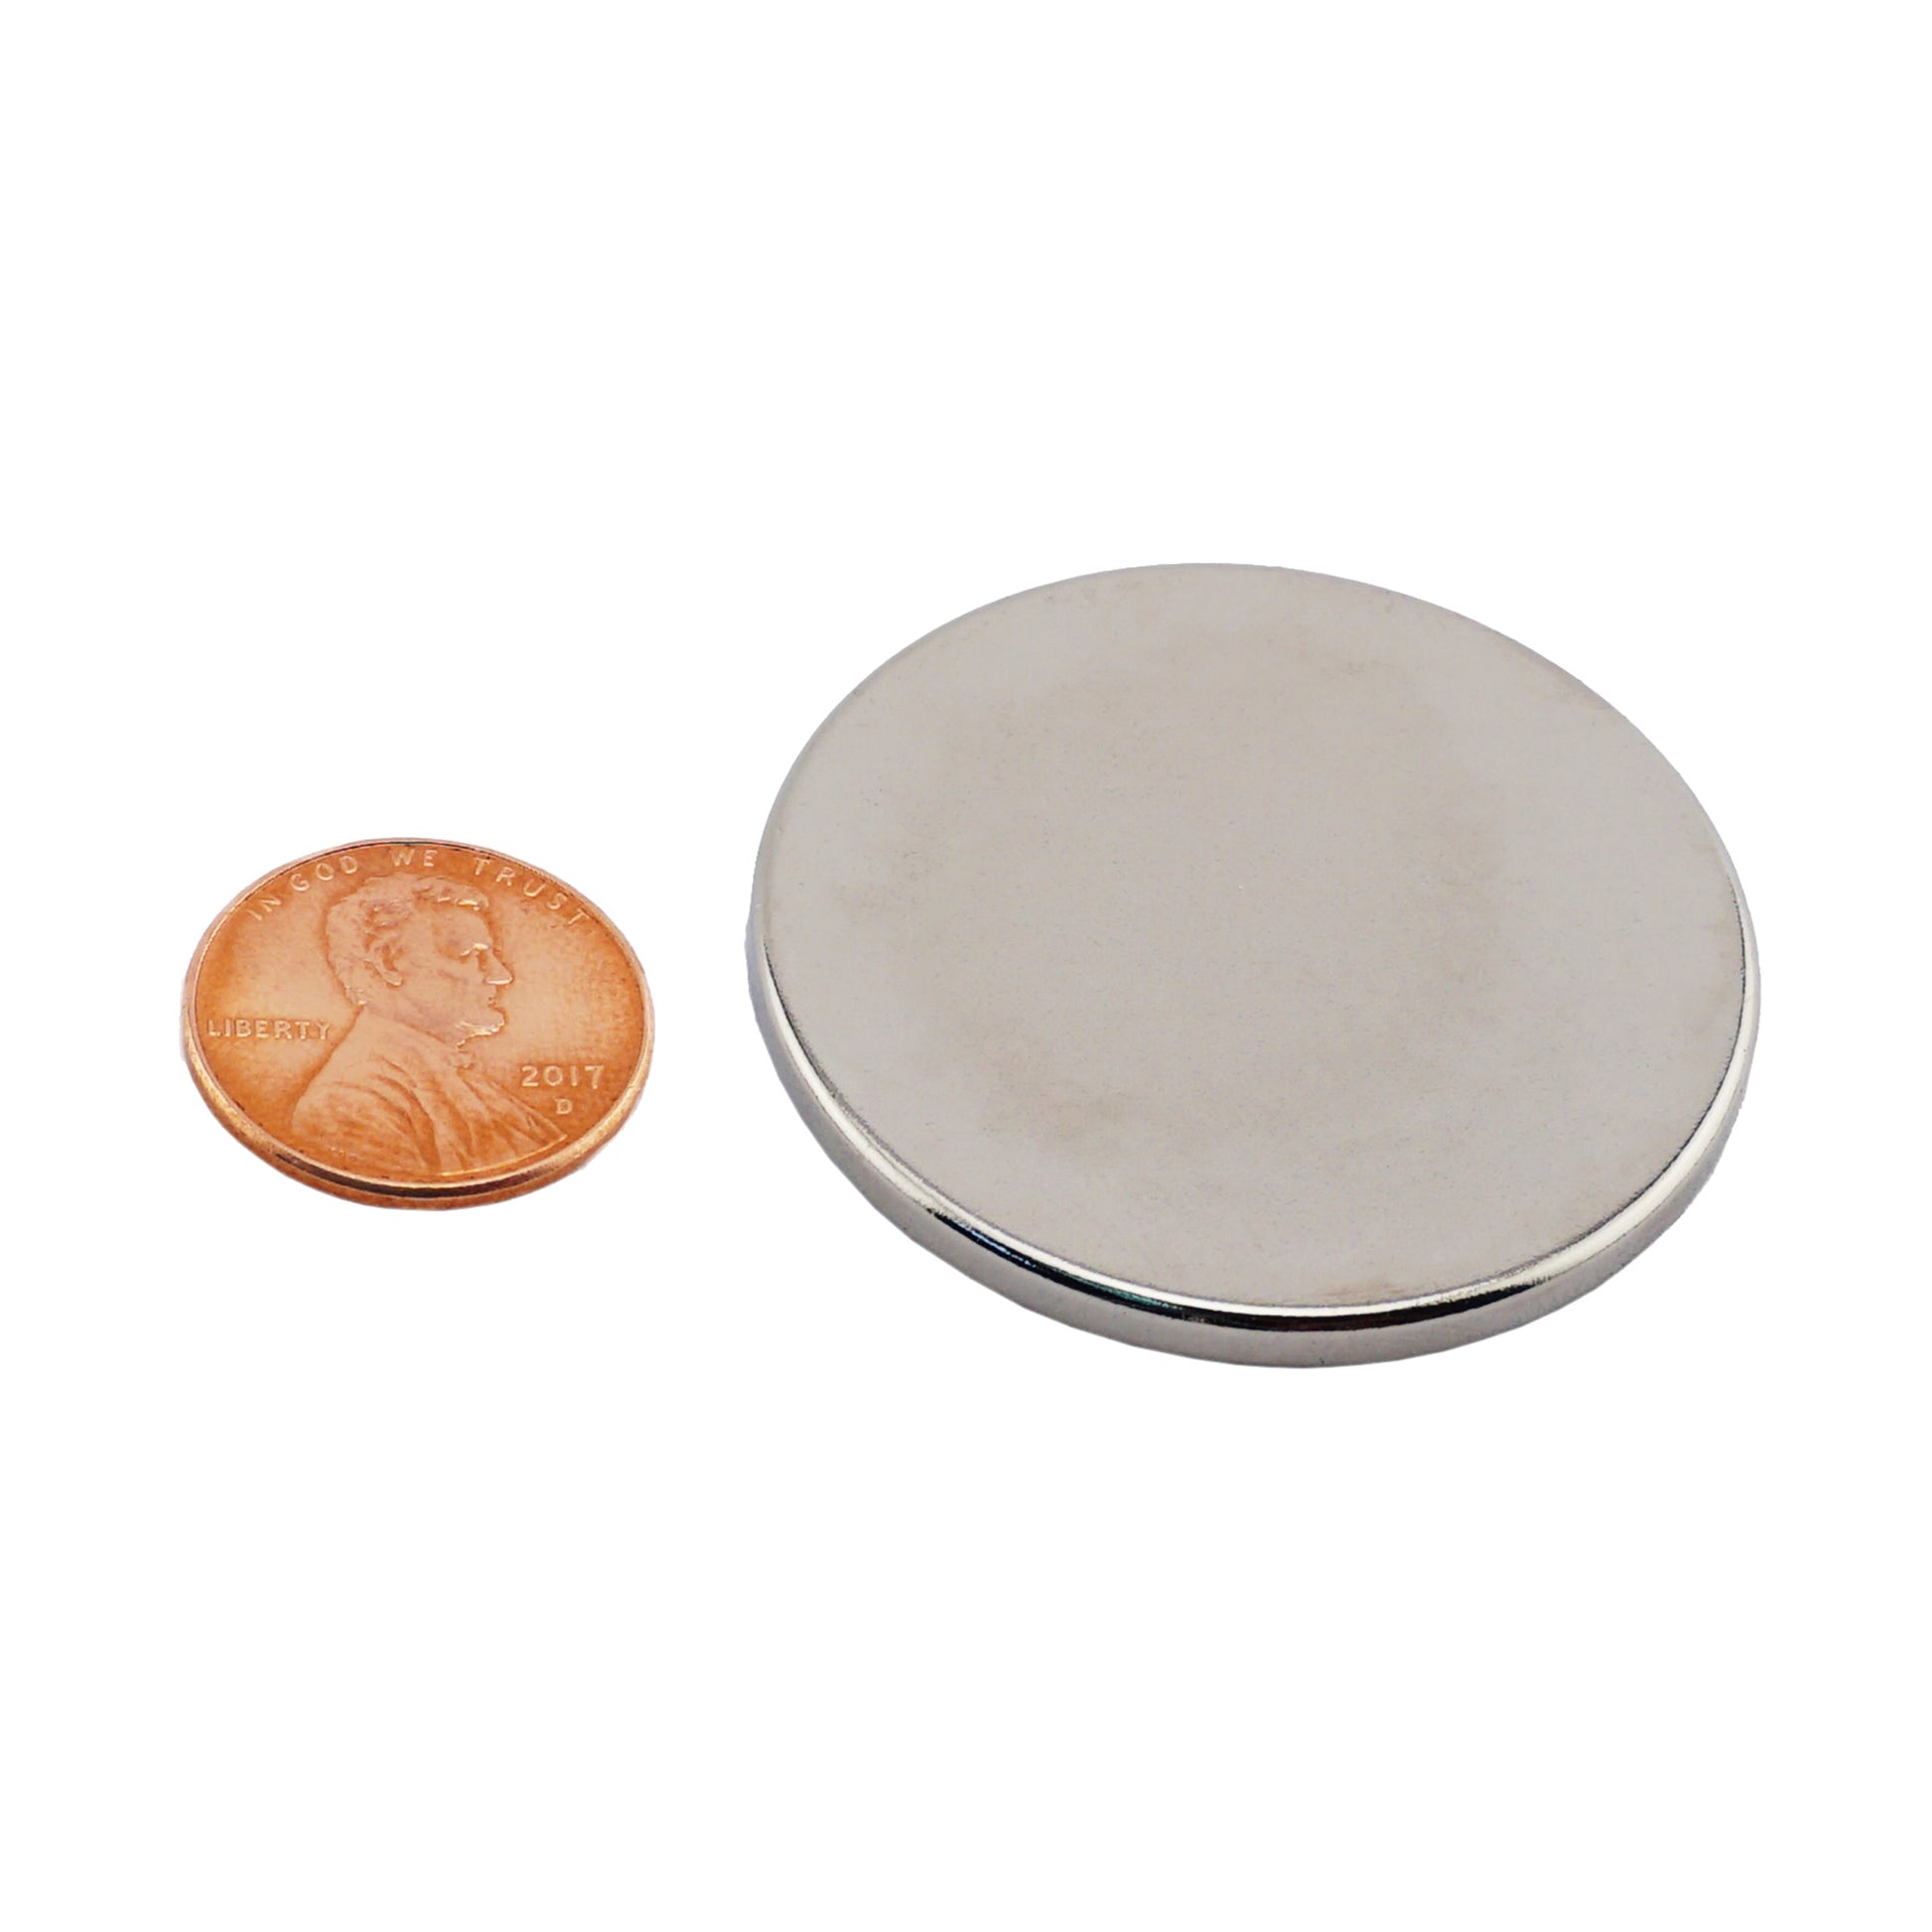 Load image into Gallery viewer, ND016200N Neodymium Disc Magnet - Compared to Penny for Size Reference